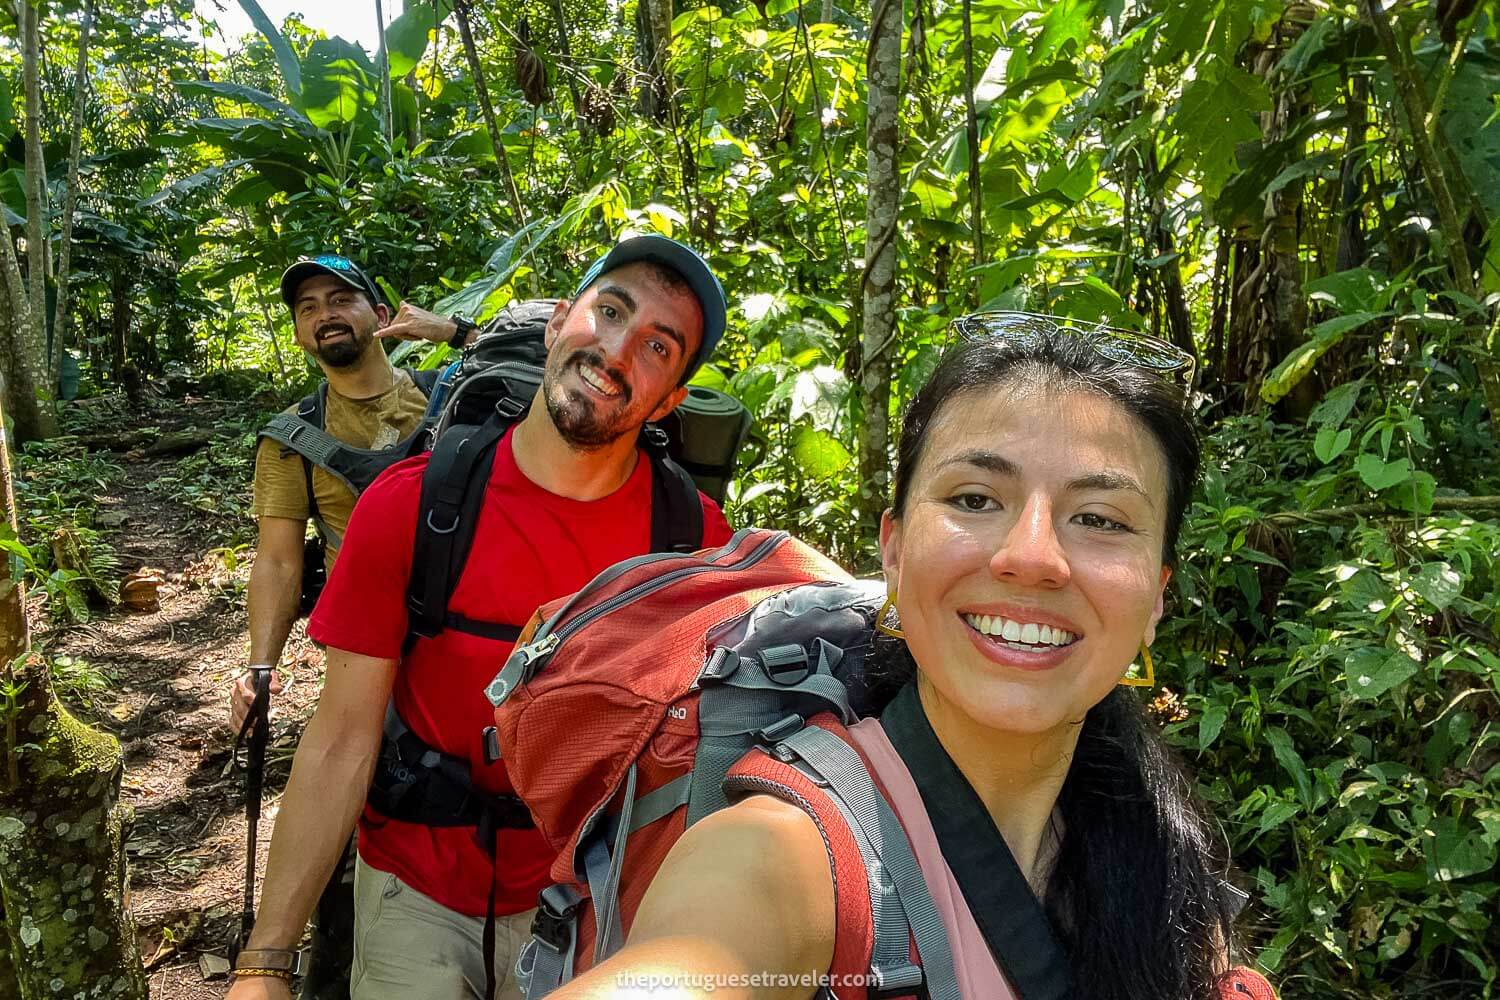 Me, Jhos and Leandro on our way up the jungle to the Shuar community, on the Cueva de Los Tayos expedition.